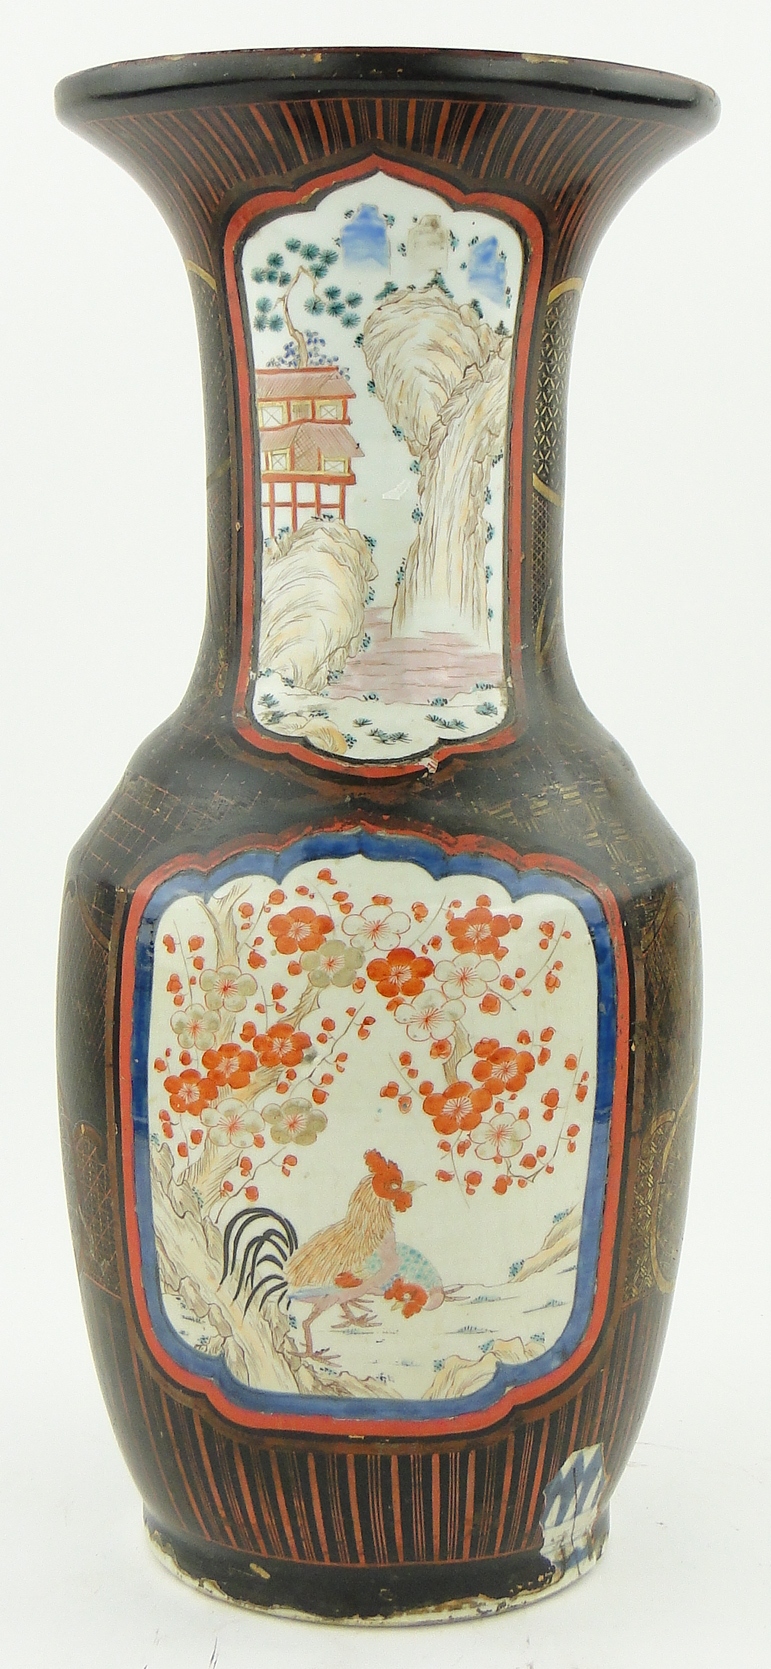 18/19th century Chinese vase
with lacquer and hatch gilded ground covering blue and white - Image 5 of 10